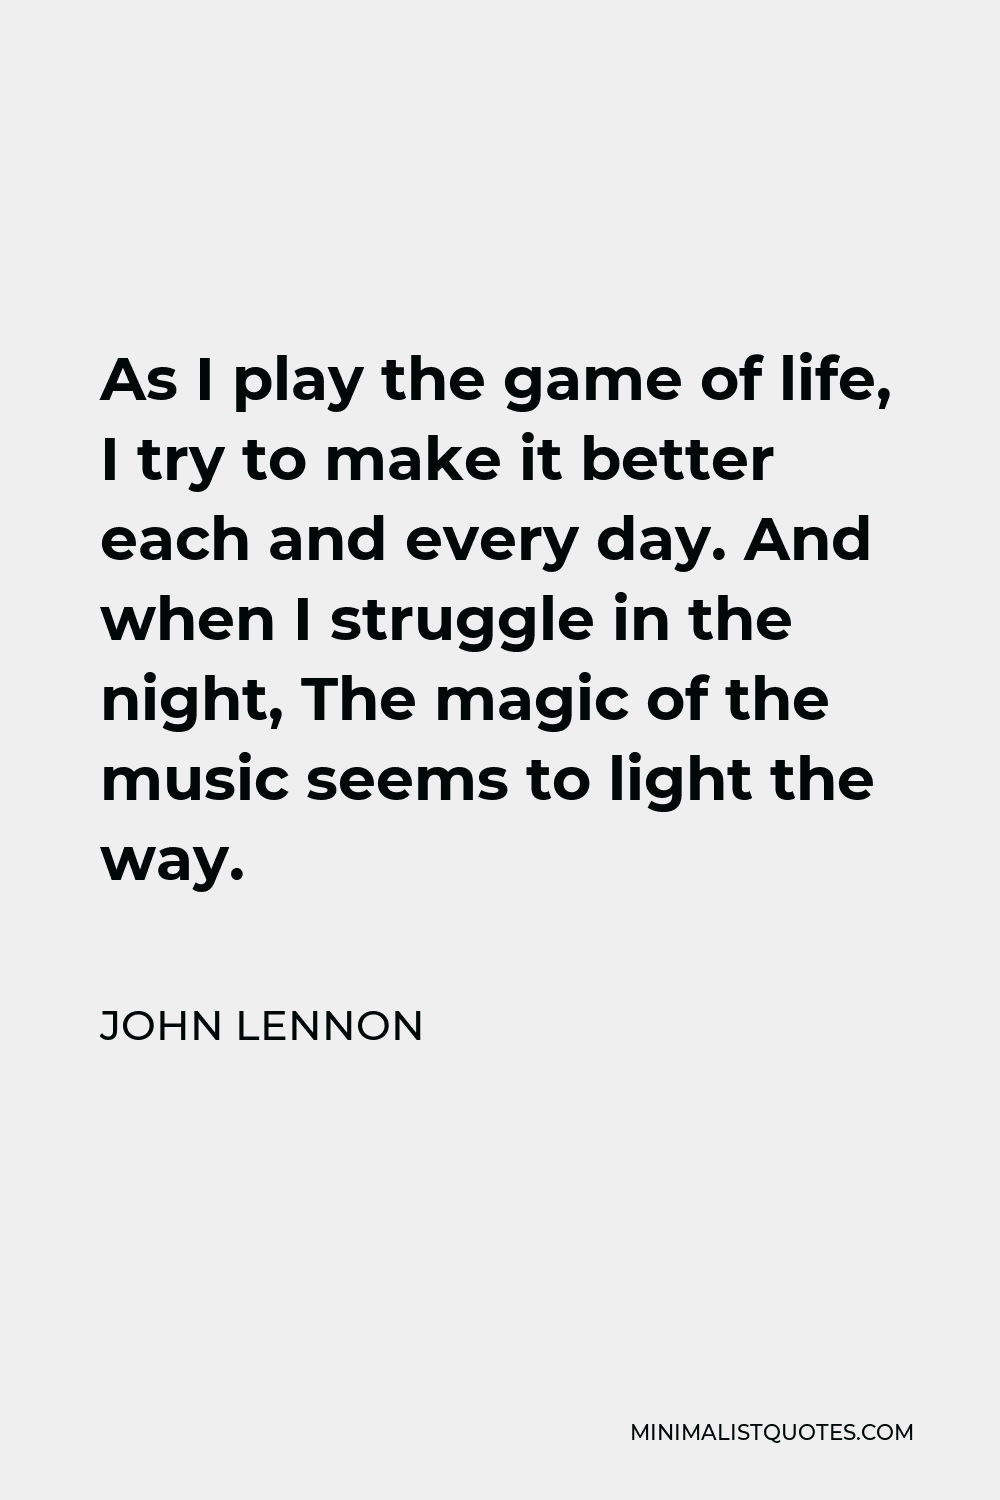 John Lennon Quote - As I play the game of life, I try to make it better each and every day. And when I struggle in the night, The magic of the music seems to light the way.